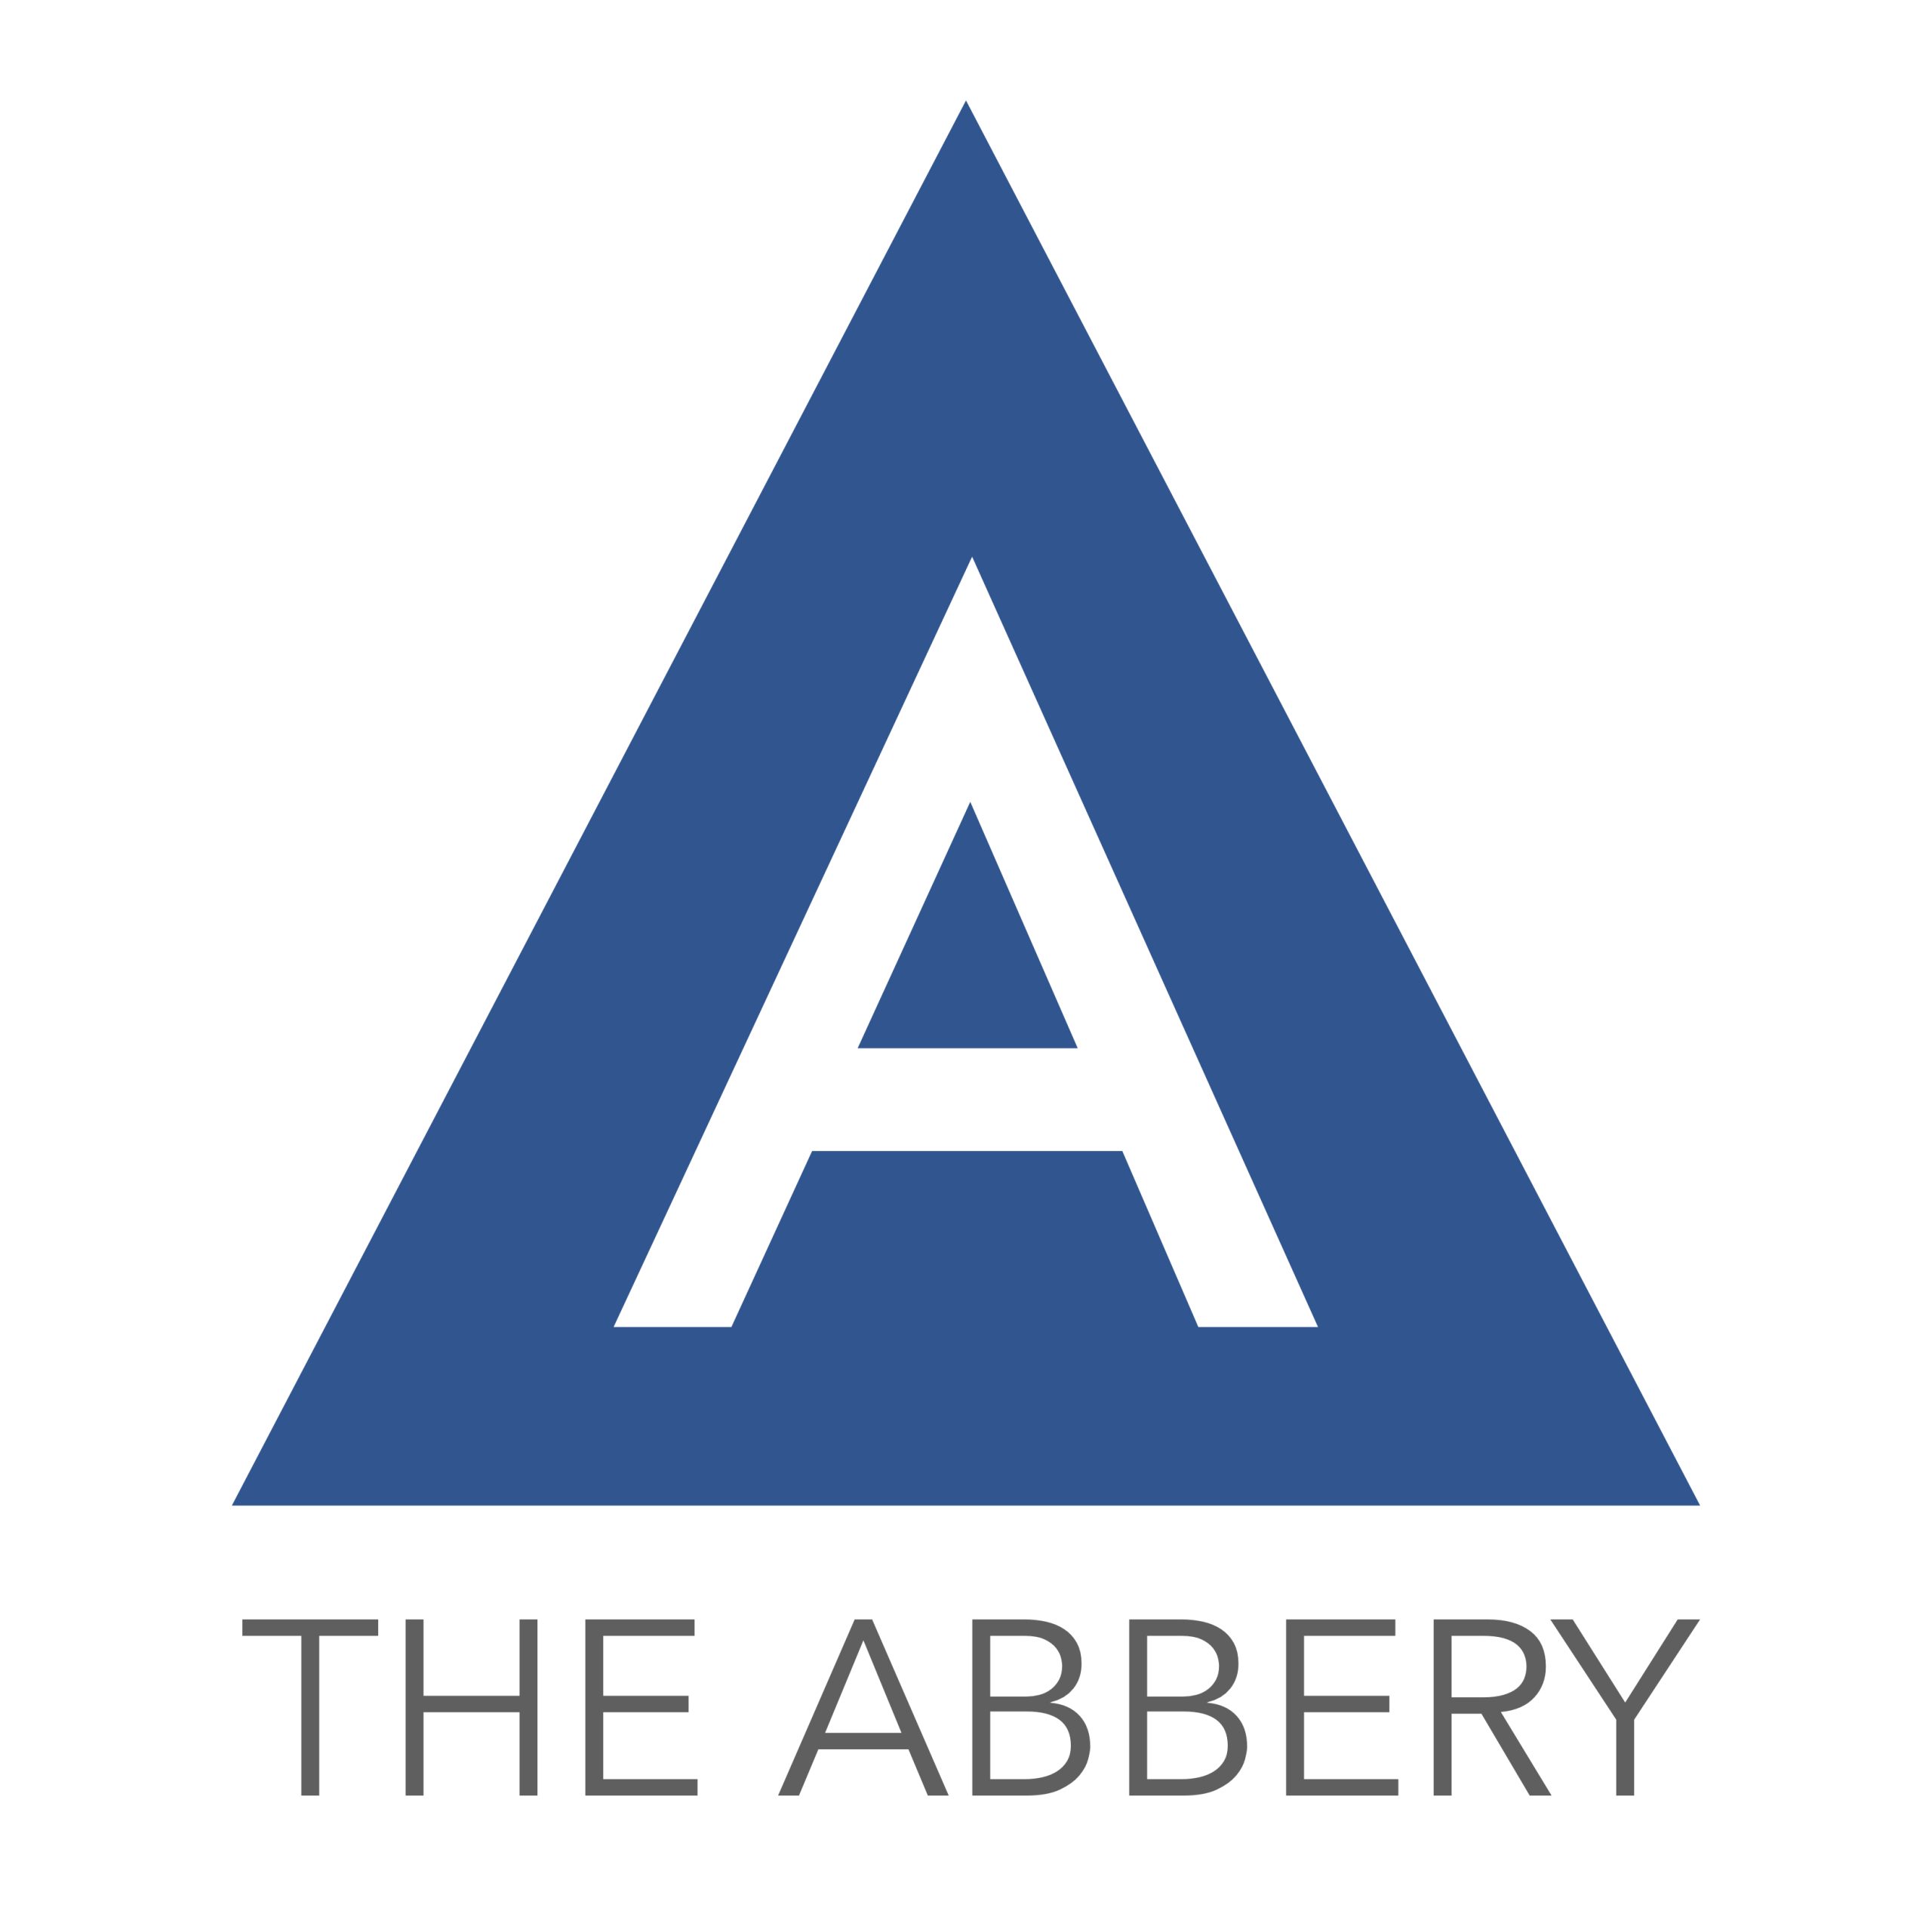 The Abbery